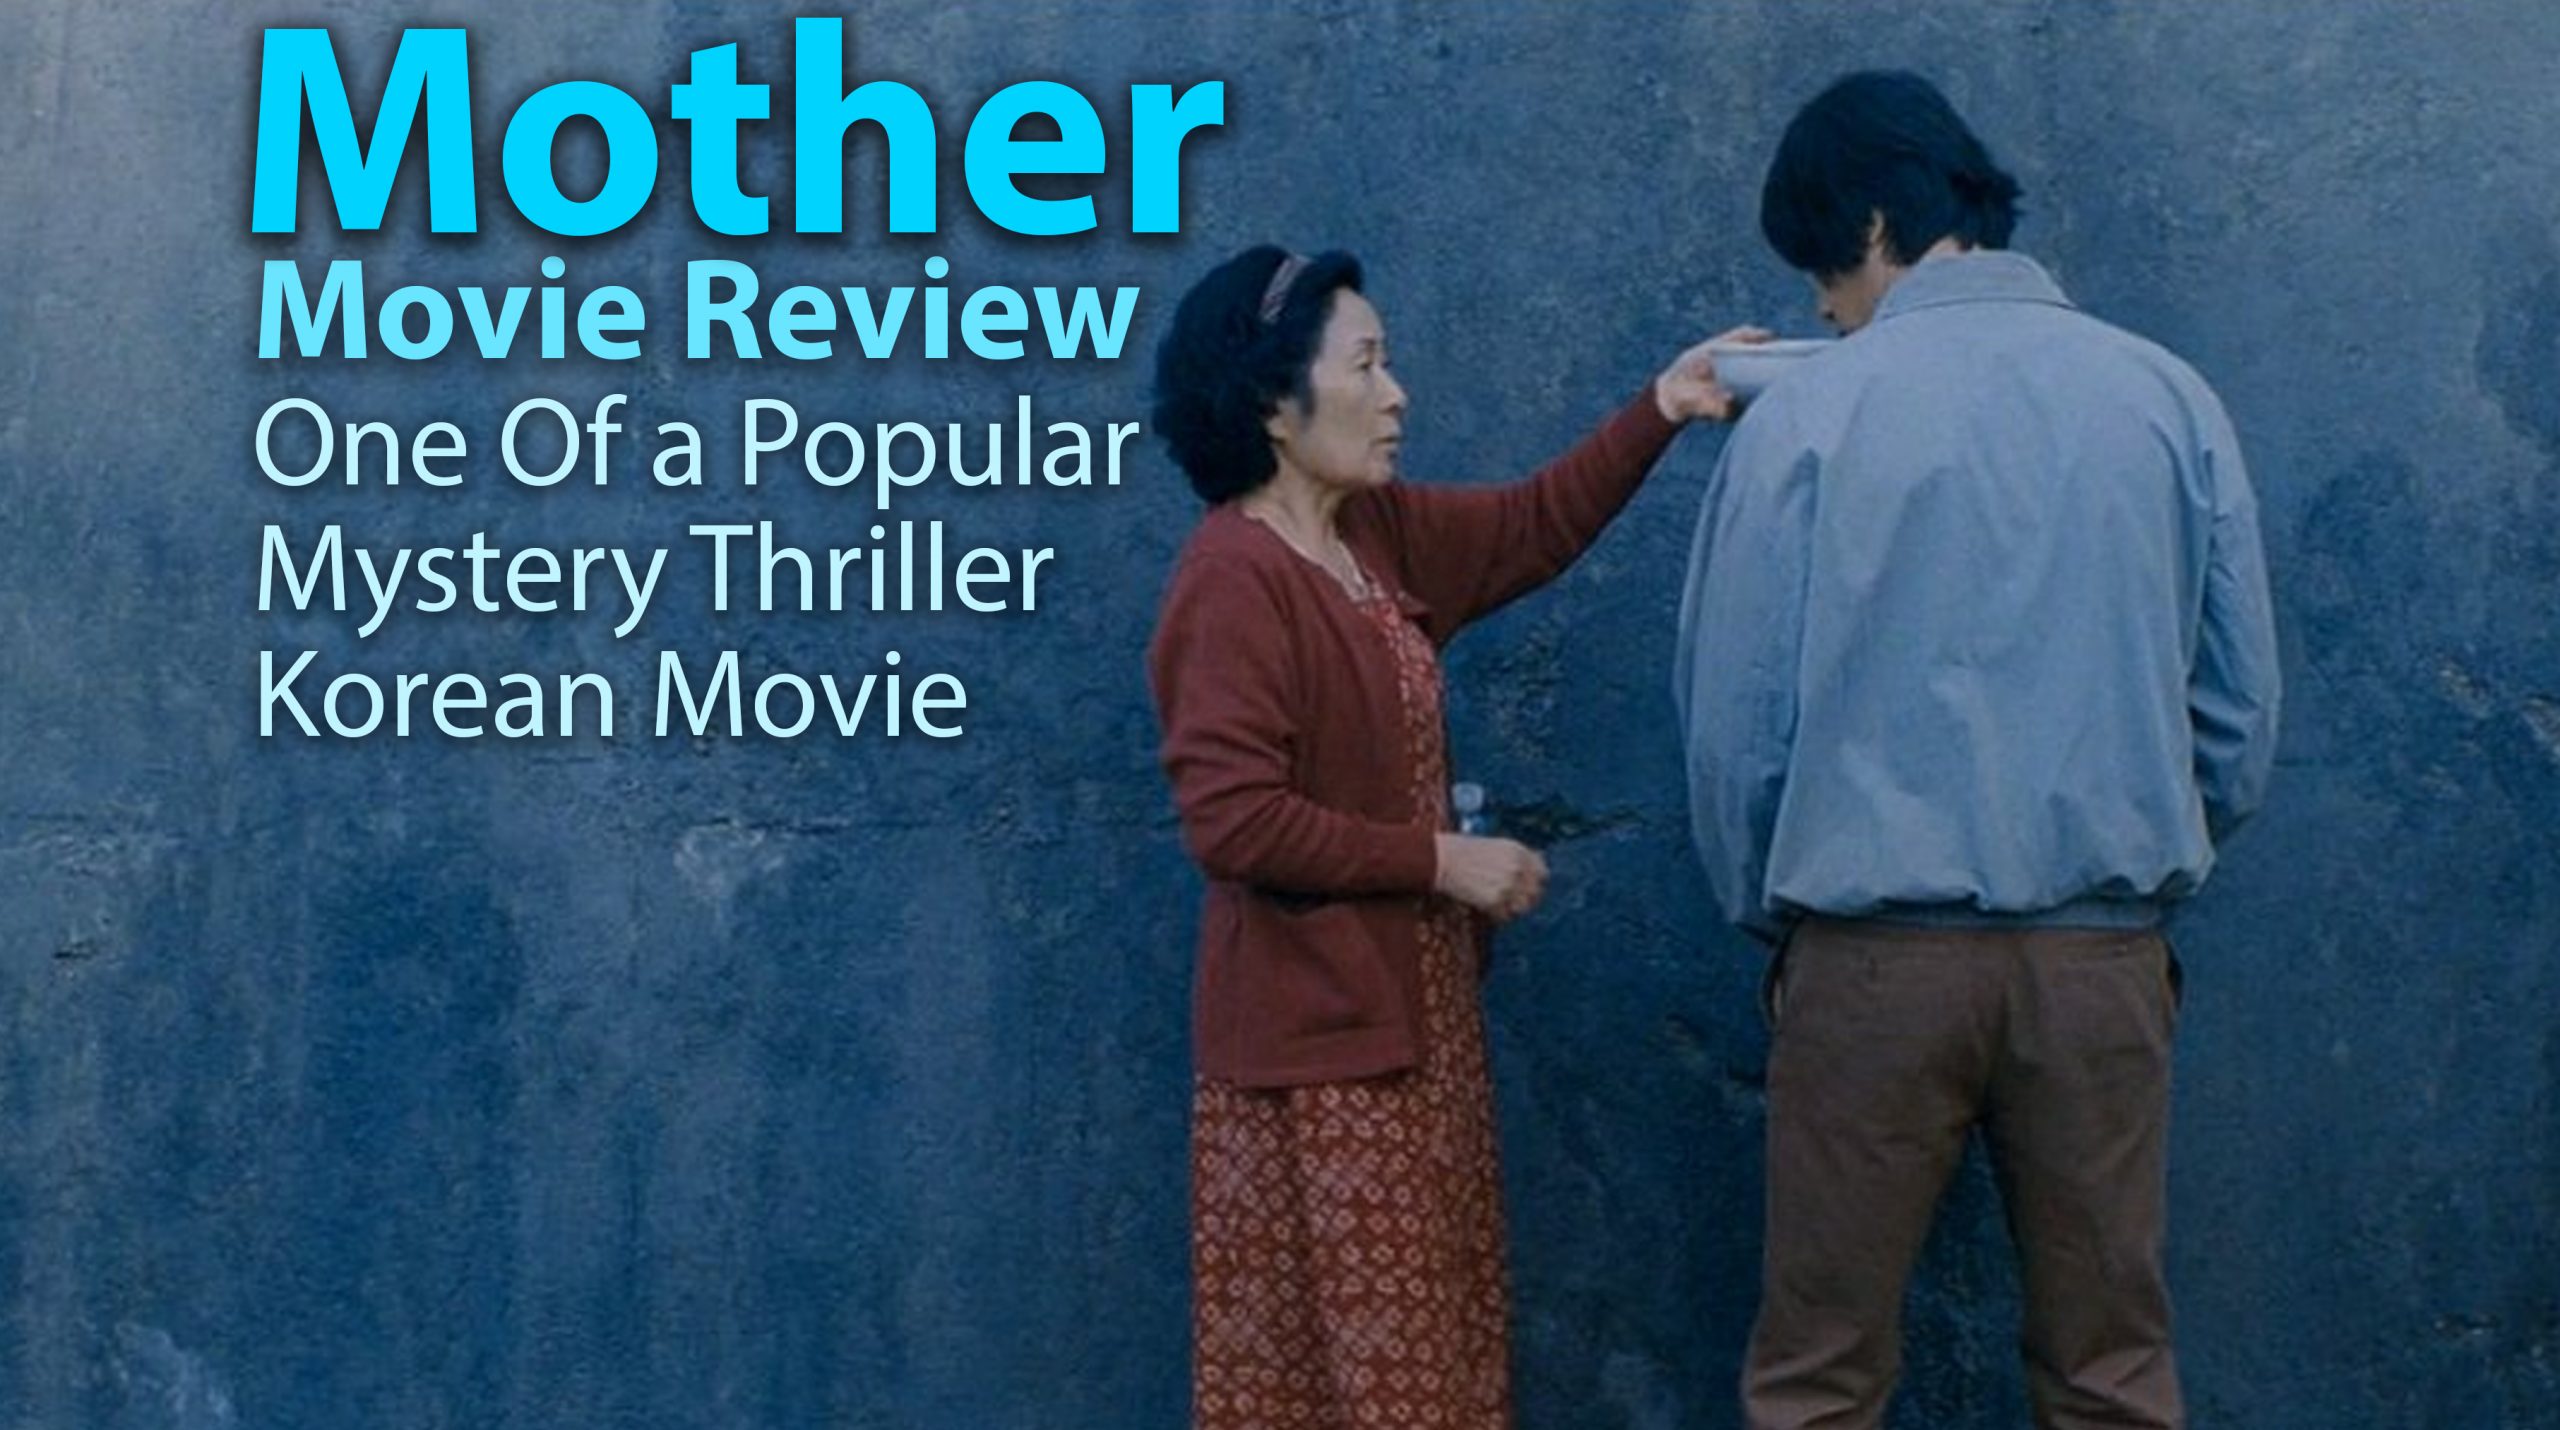 Mother Movie Review: One Of a Popular Mystery Thriller Korean Movie